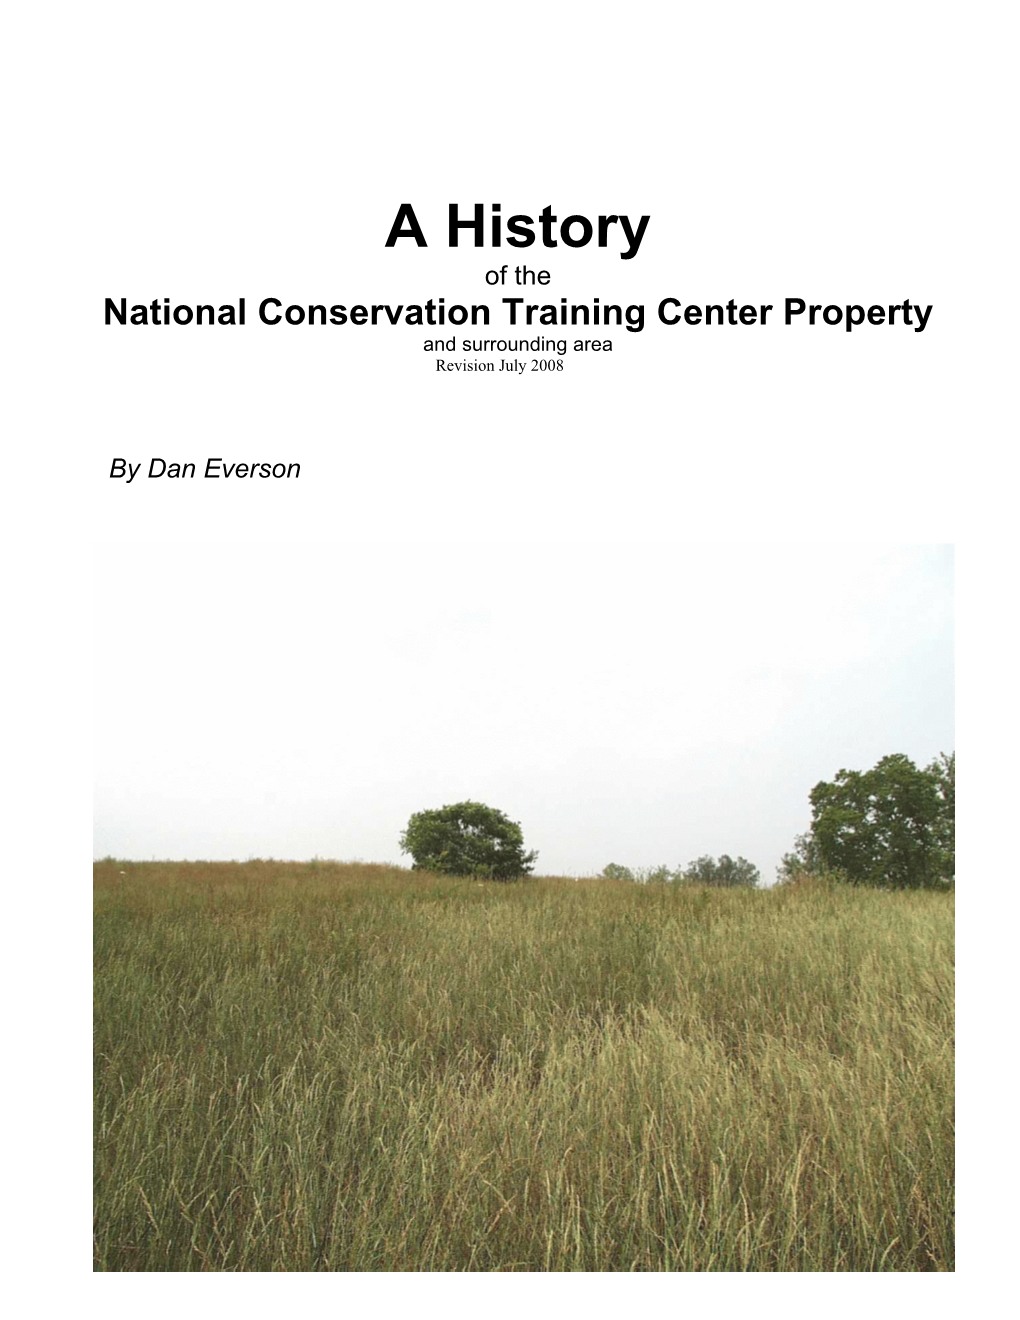 A History of the National Conservation Training Center Property and Surrounding Area Revision July 2008